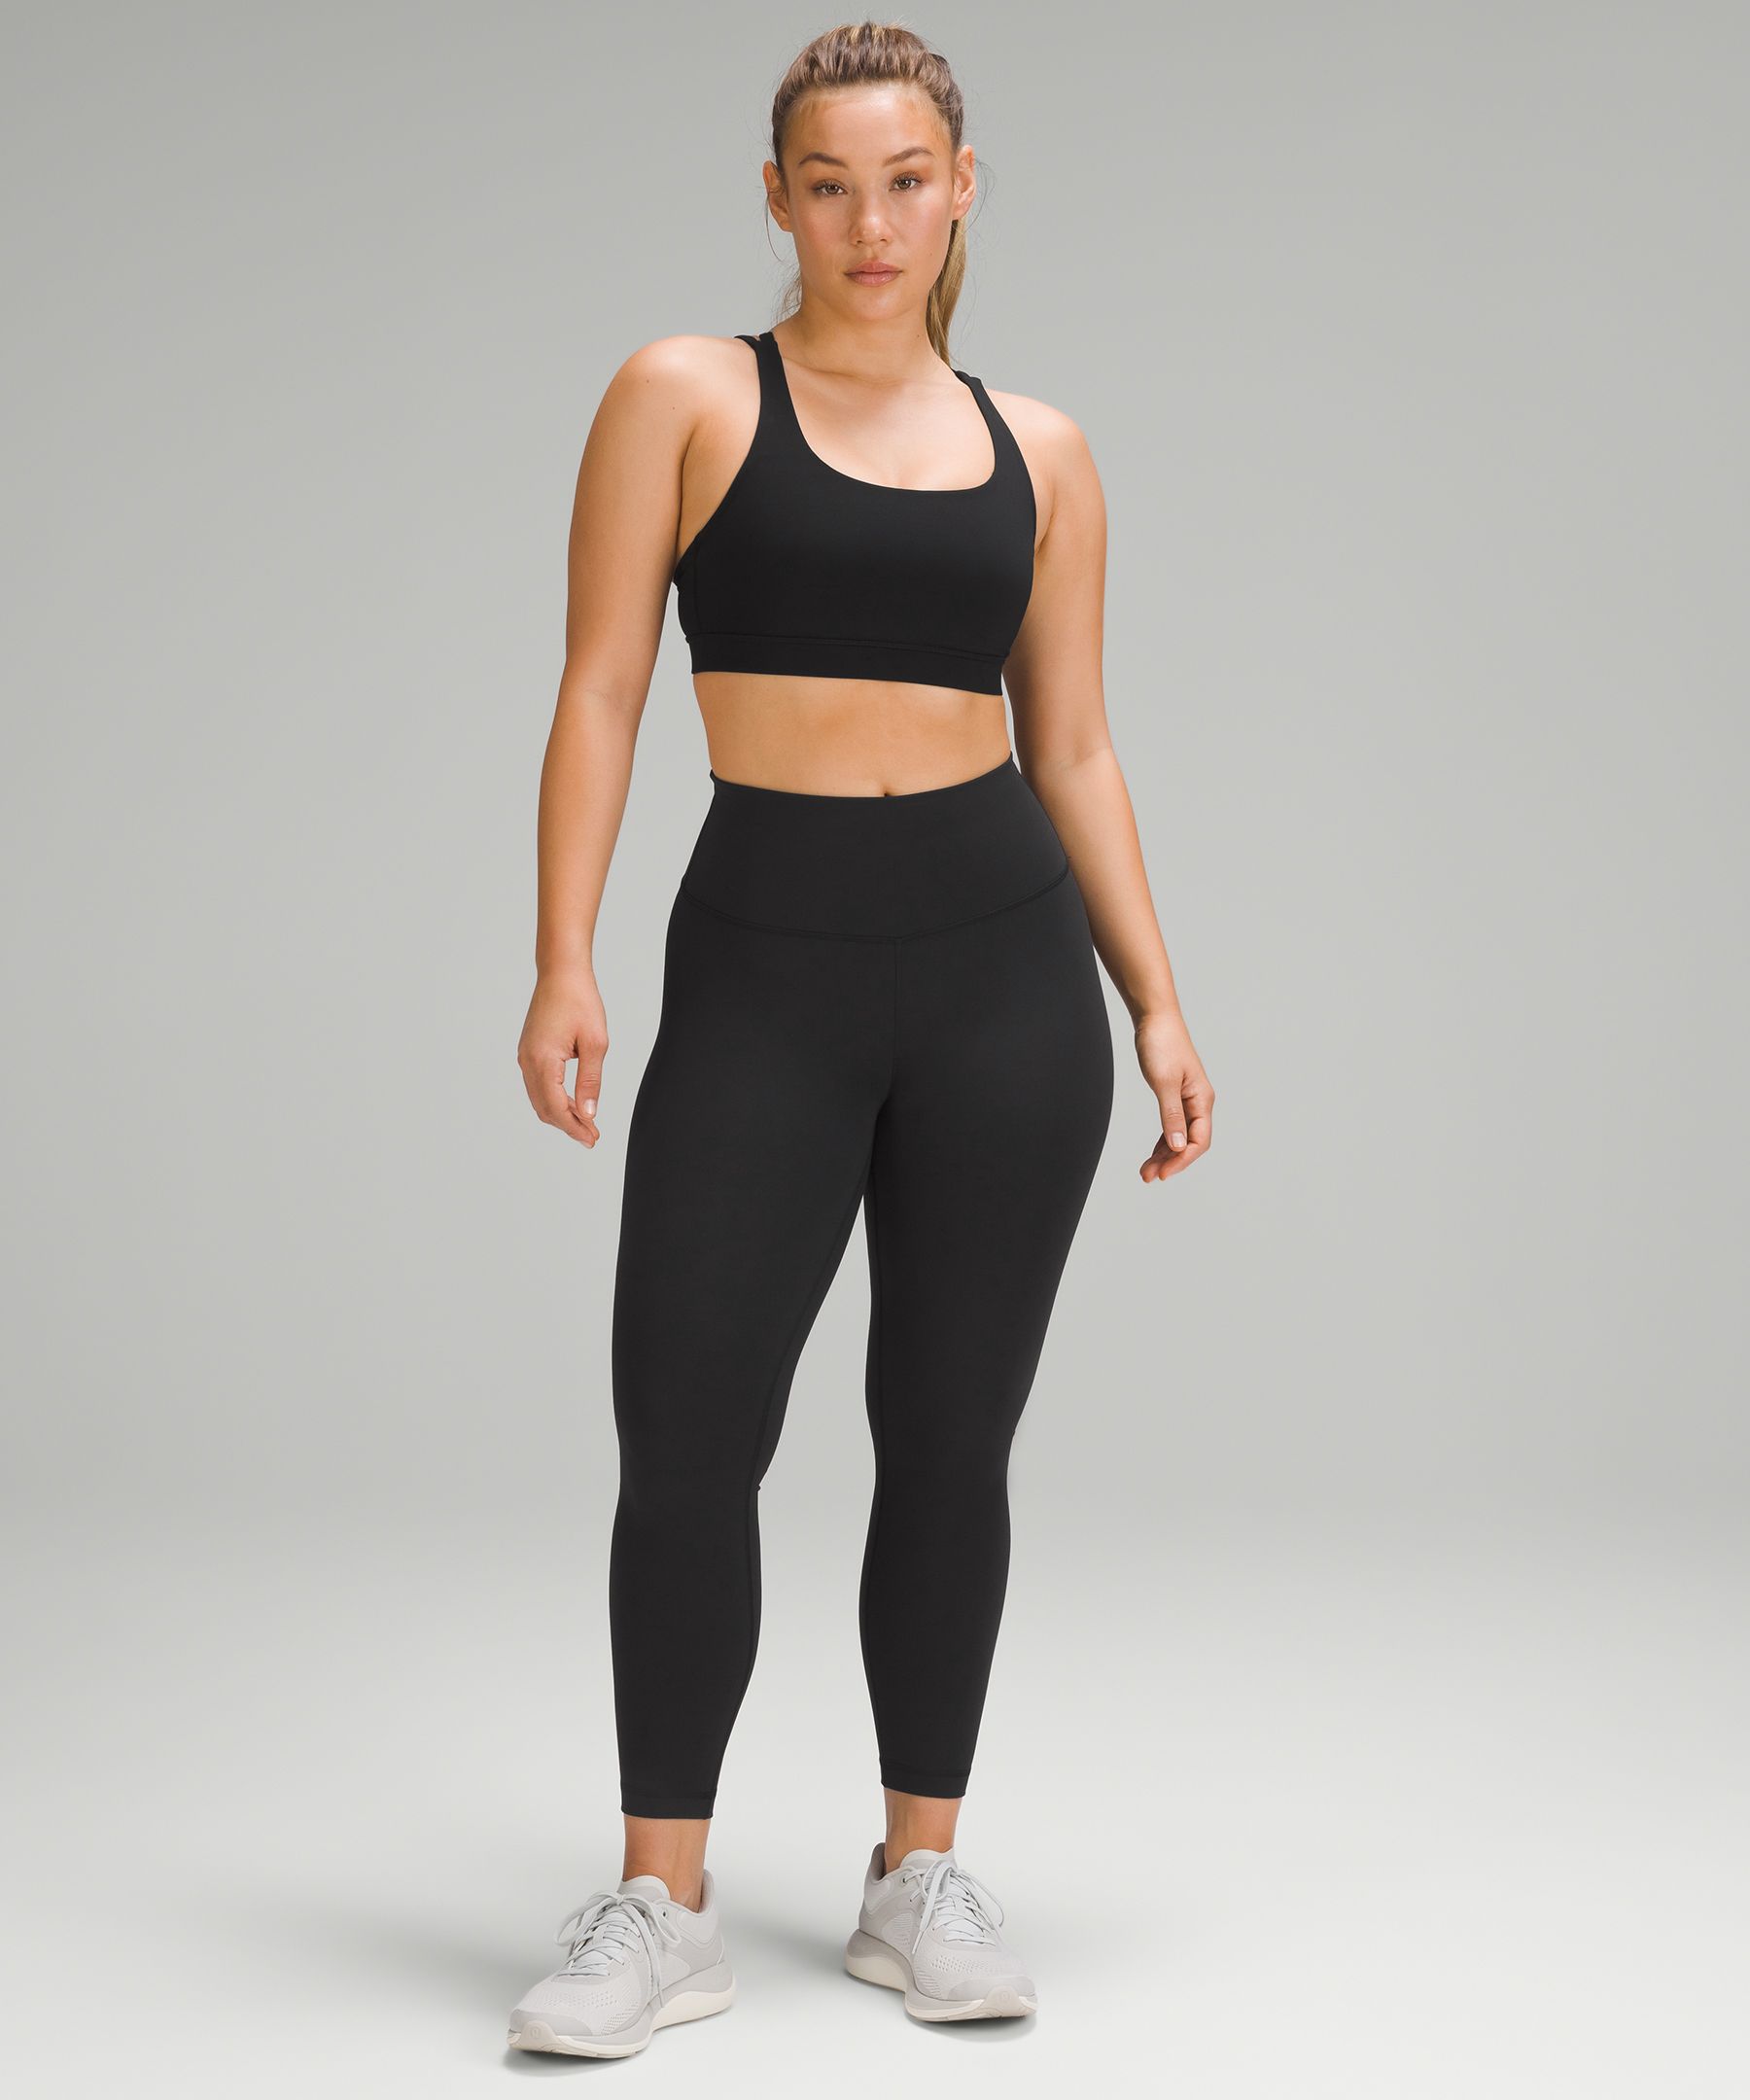 Dottie Tribal Wunder Unders, Dottie Tribal Pace Rivals, Cool Racerback and  More - The Sweat Edit